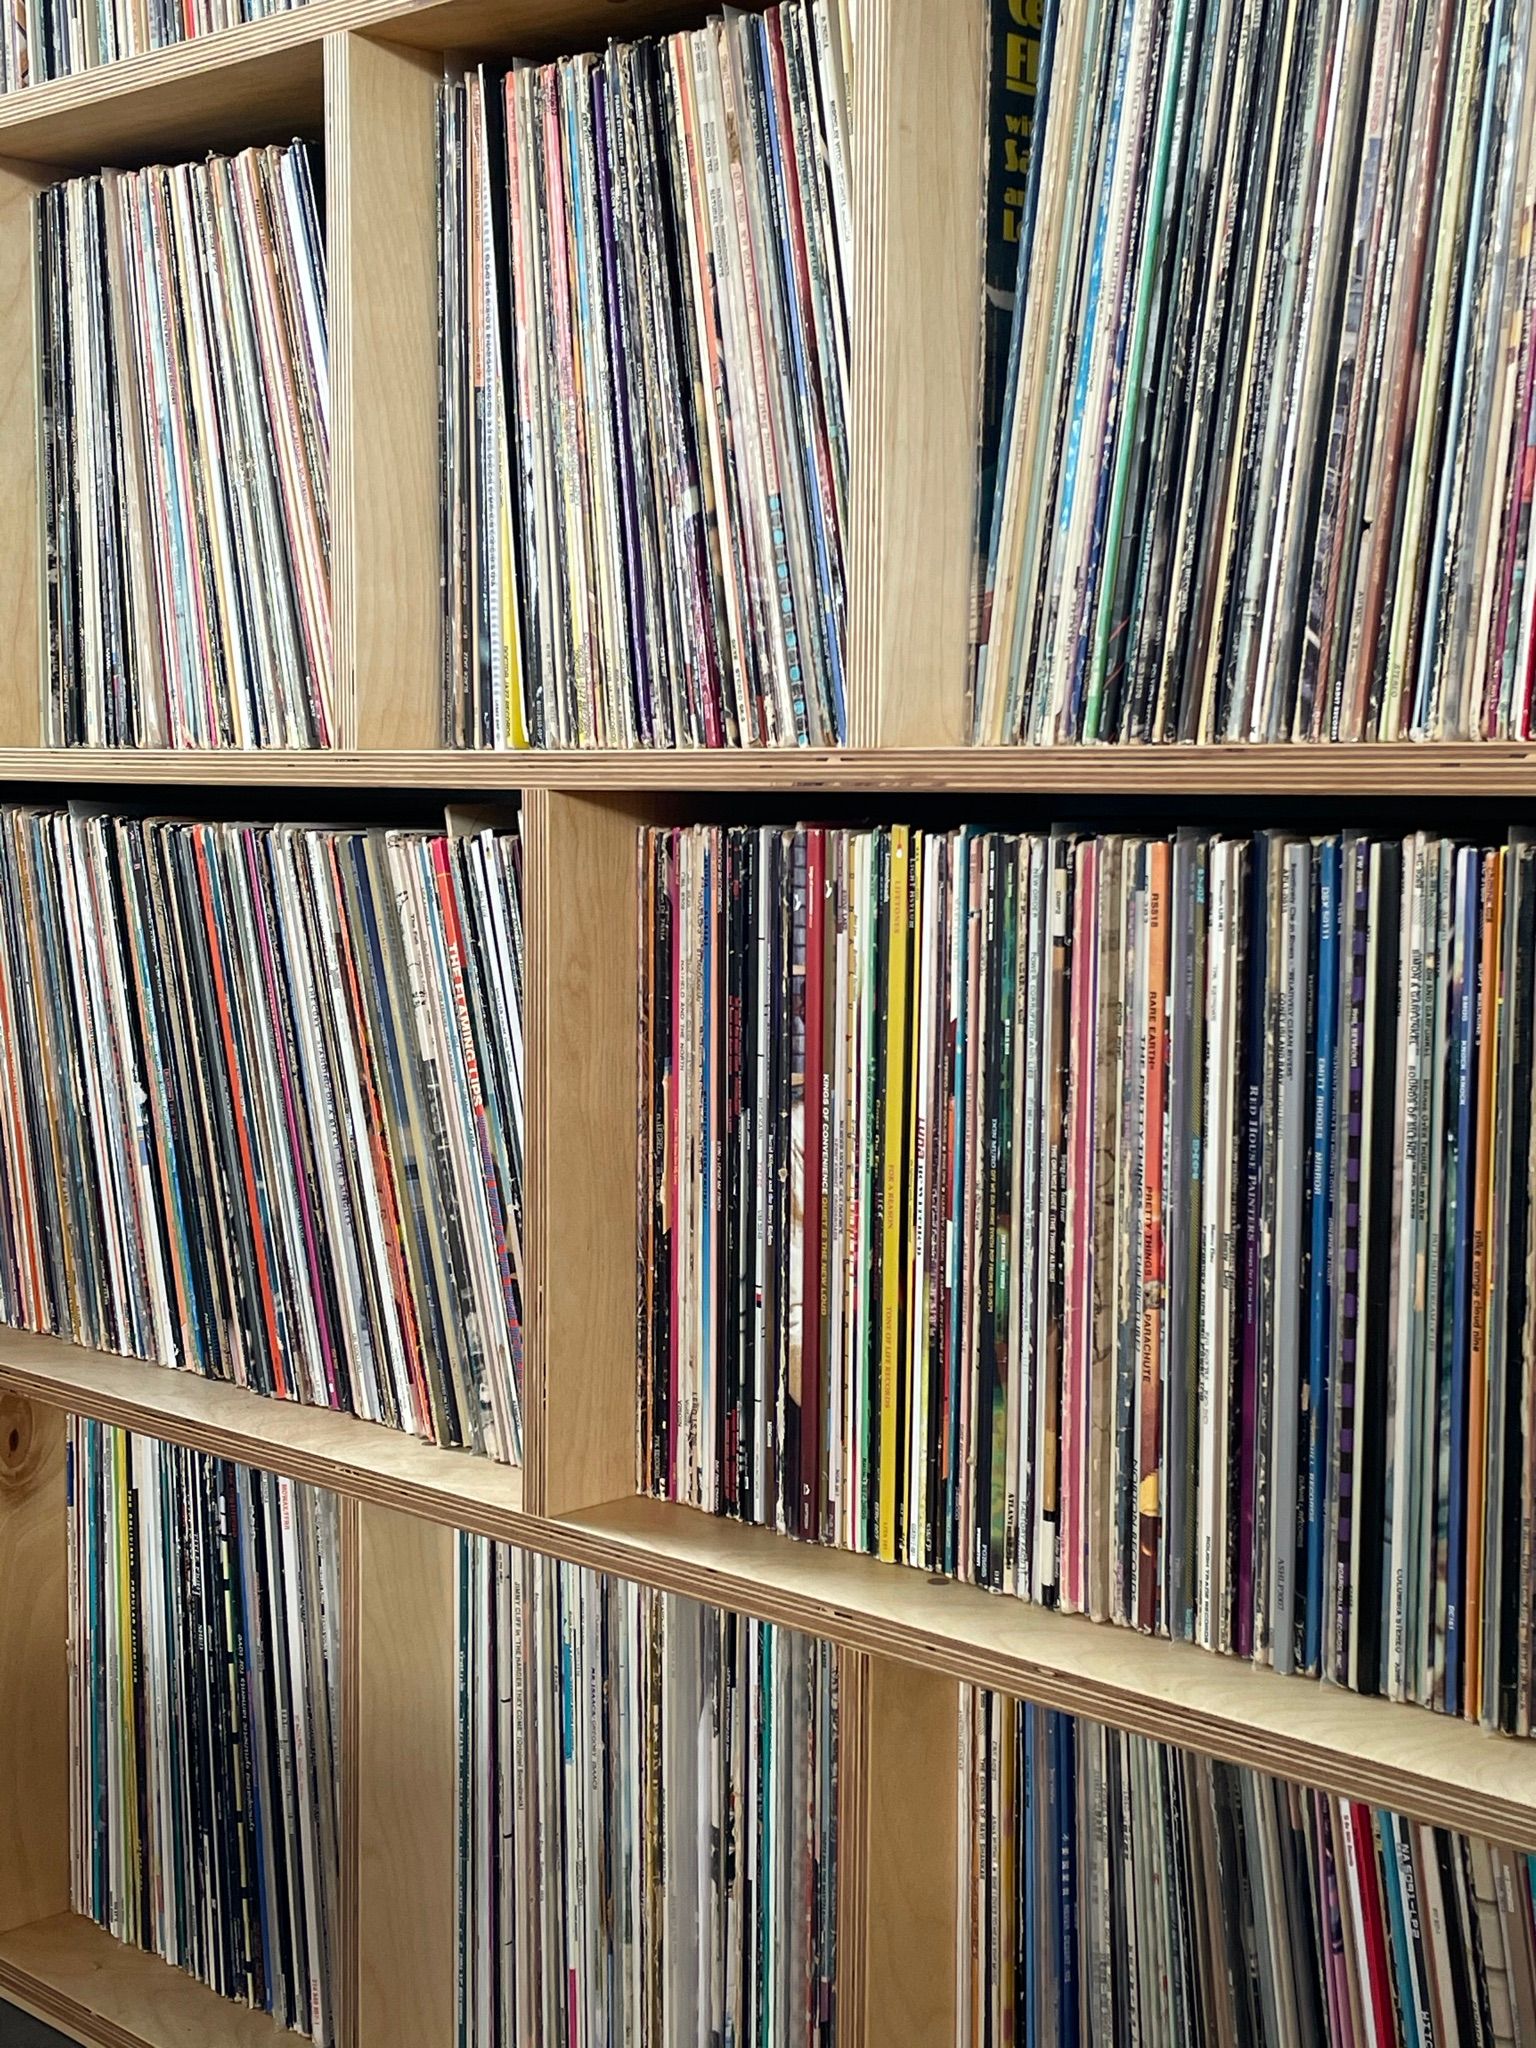  Record Shelves product image 4